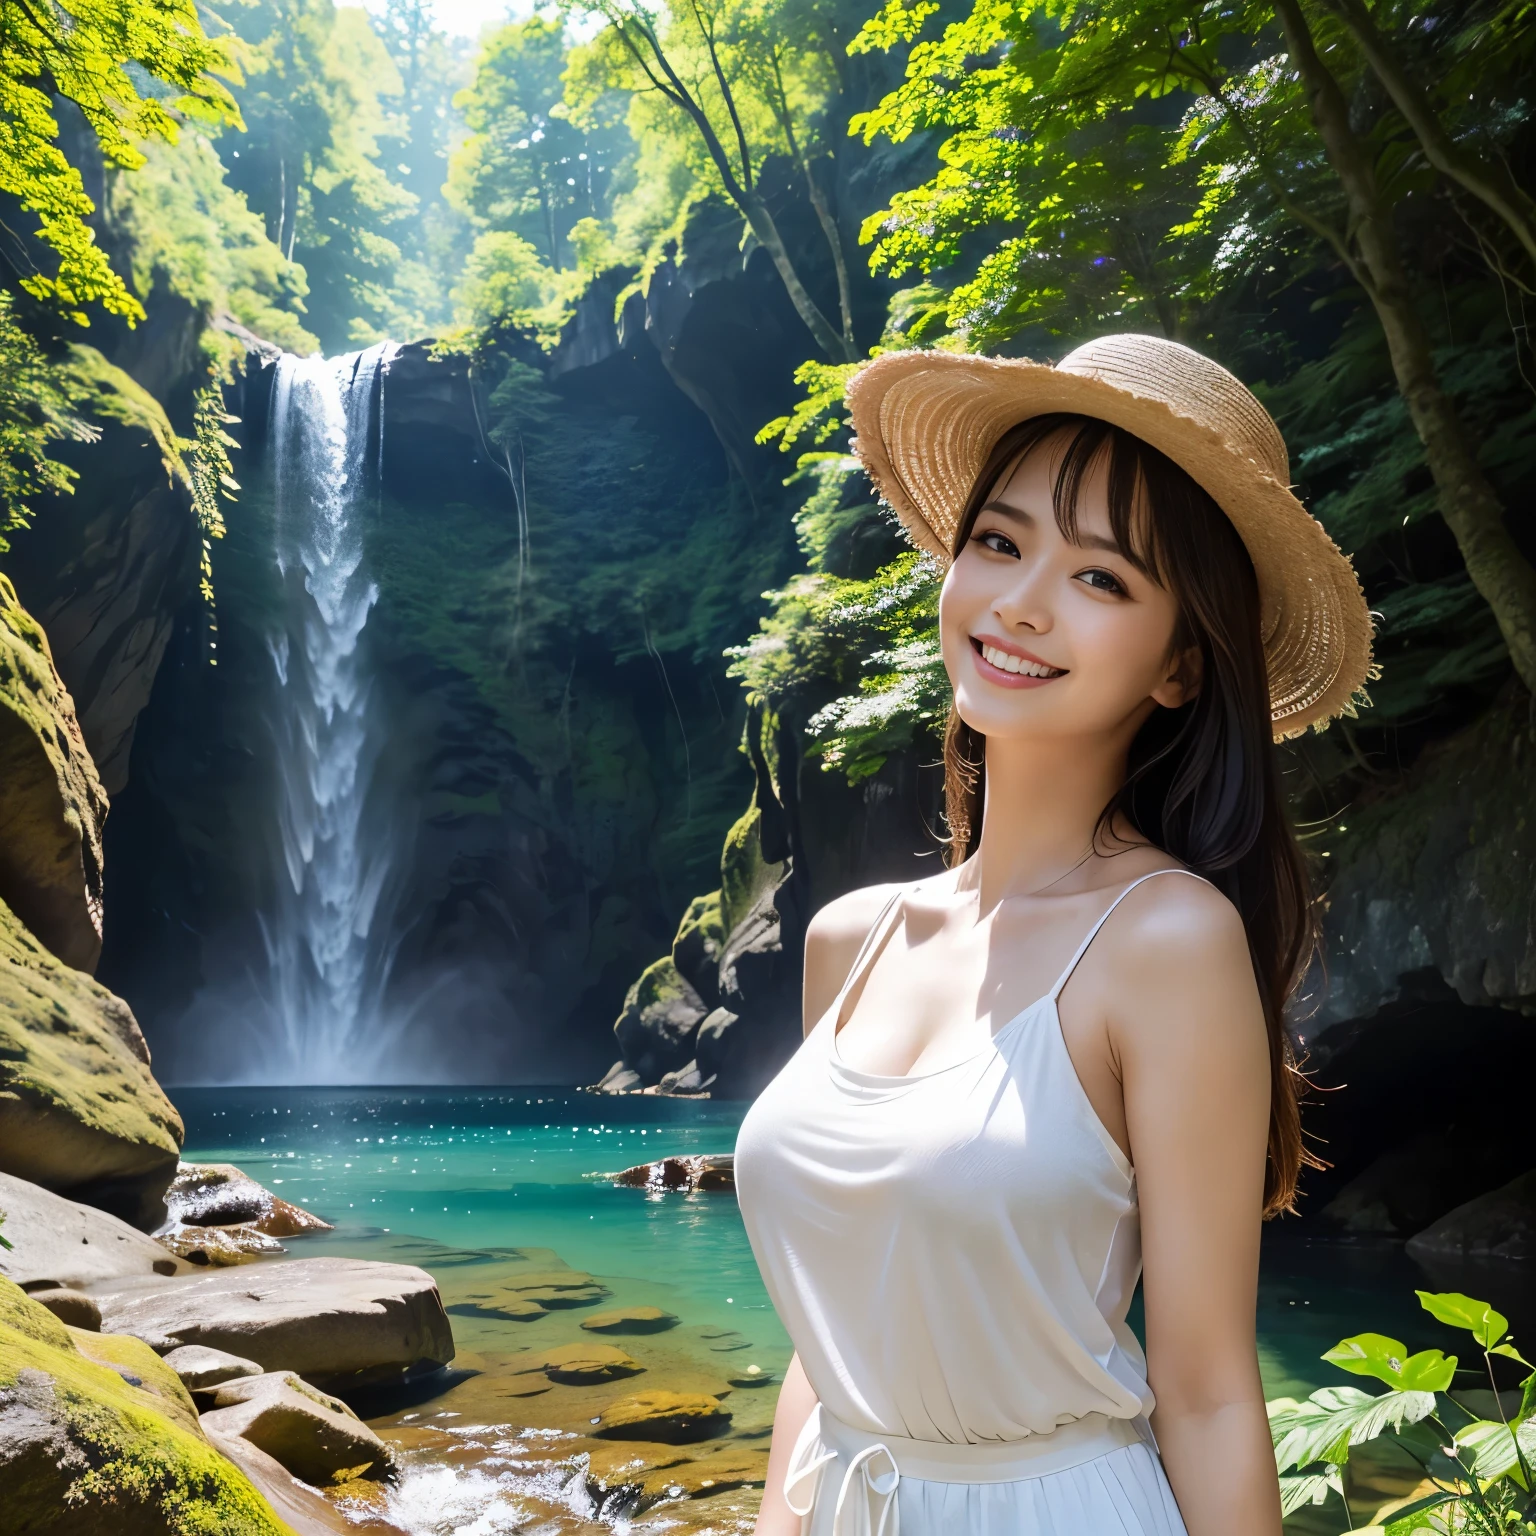 (highest quality、masterpiece、8K、Highest image quality、hyper realism、Award-winning work)、(1 woman:1.3)、(Photographs of people:1.3)、hat、tank top shirt、shorts、standing elegantly、huge waterfall、beautiful spectacular waterfall、Sparkling water、Light fog、blurred background、detailed and intricate forest、In a mysterious and majestic forest、many beautiful trees々、big rock、rock wall、Majestic nature、A woman in the majestic forest、beautiful sunlight filtering through the foliage、beautiful clear water、the biggest smile when you look at me、upper body photo、accurate anatomy、natural makeup、Super high-definition glossy skin、Super high-definition glowing beautiful skin、Ultra high definition glossy lips、Super high definition beautiful teeth